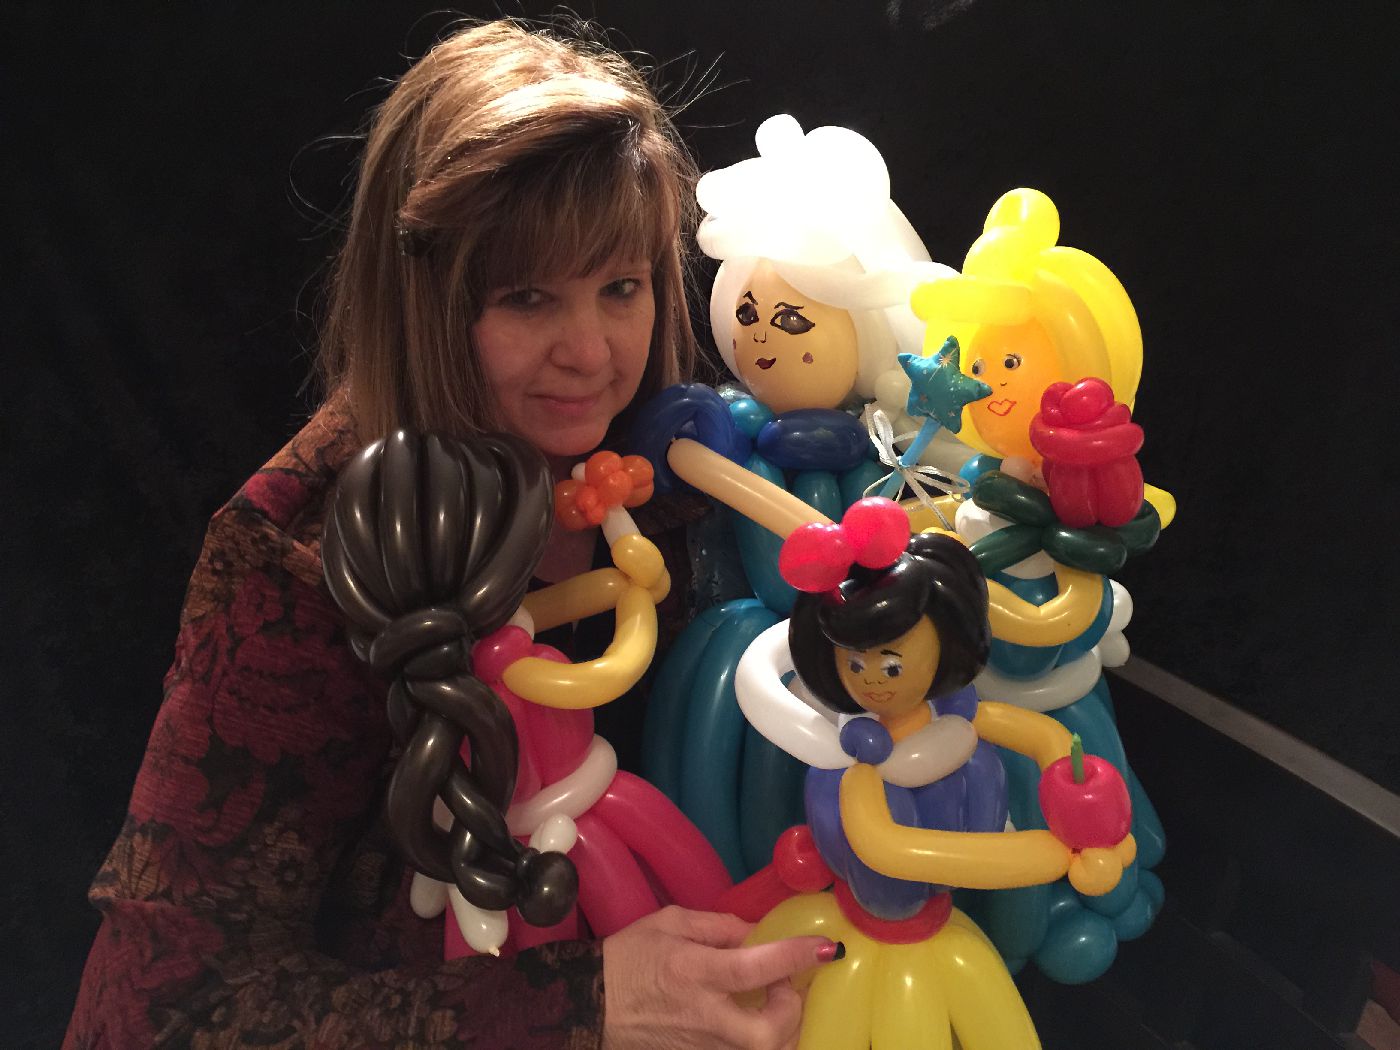 Balloon animals and sculptures for Raleigh events